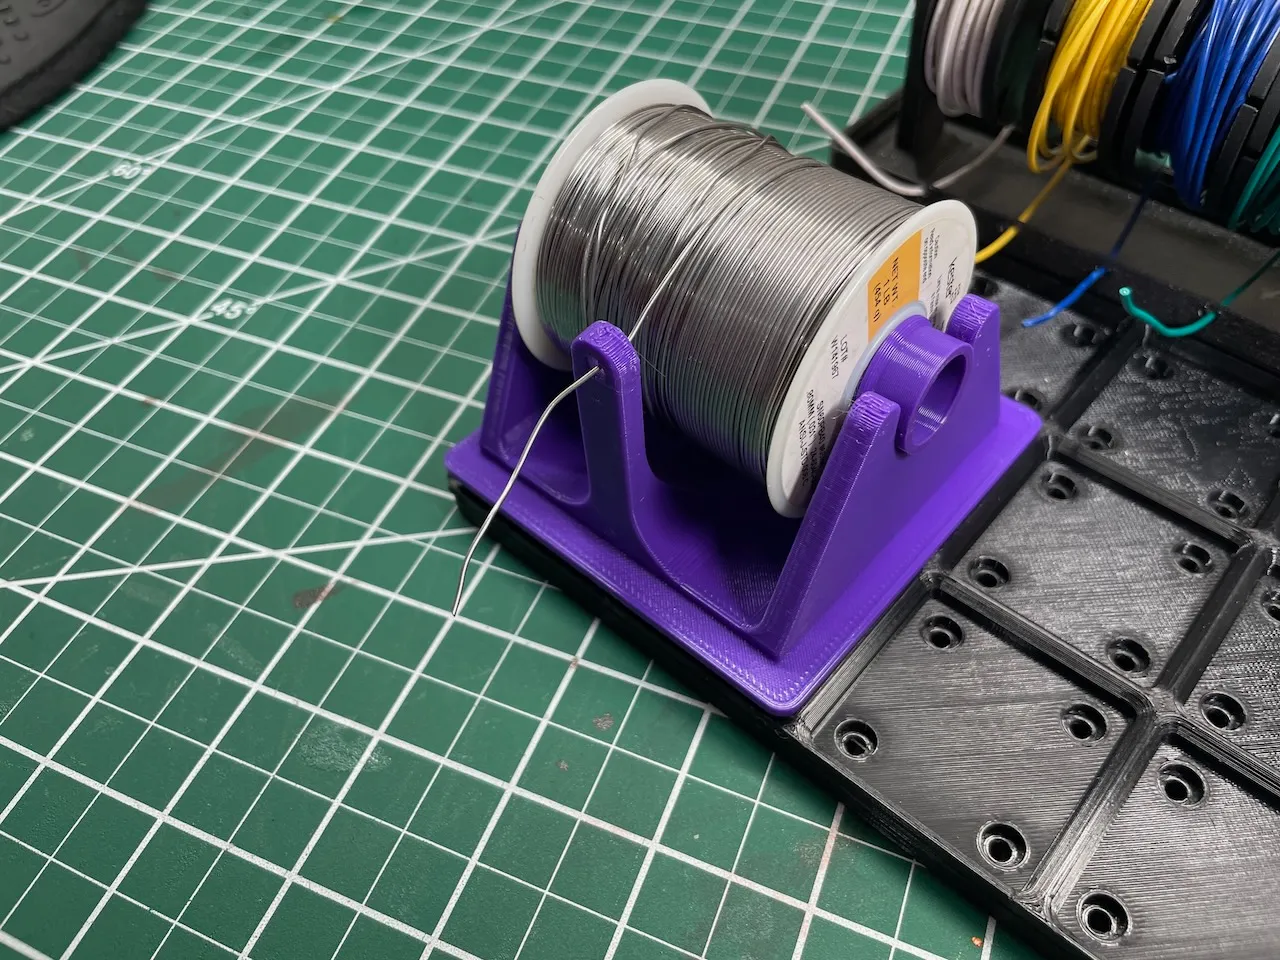 Gridfinity Kester Solder Spool Stand by micahbf